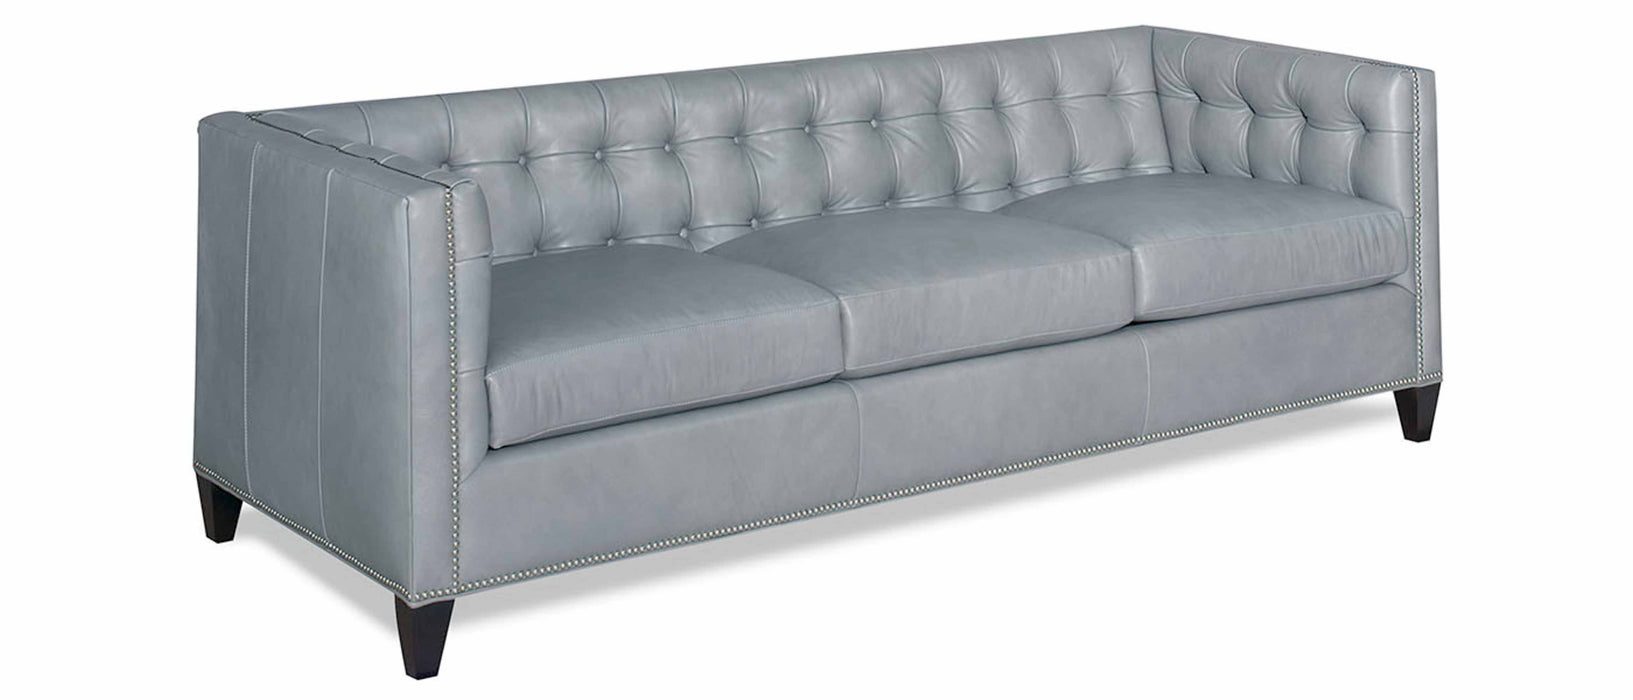 Lowery Leather Queen Size Sofa Sleeper | American Tradition | Wellington's Fine Leather Furniture